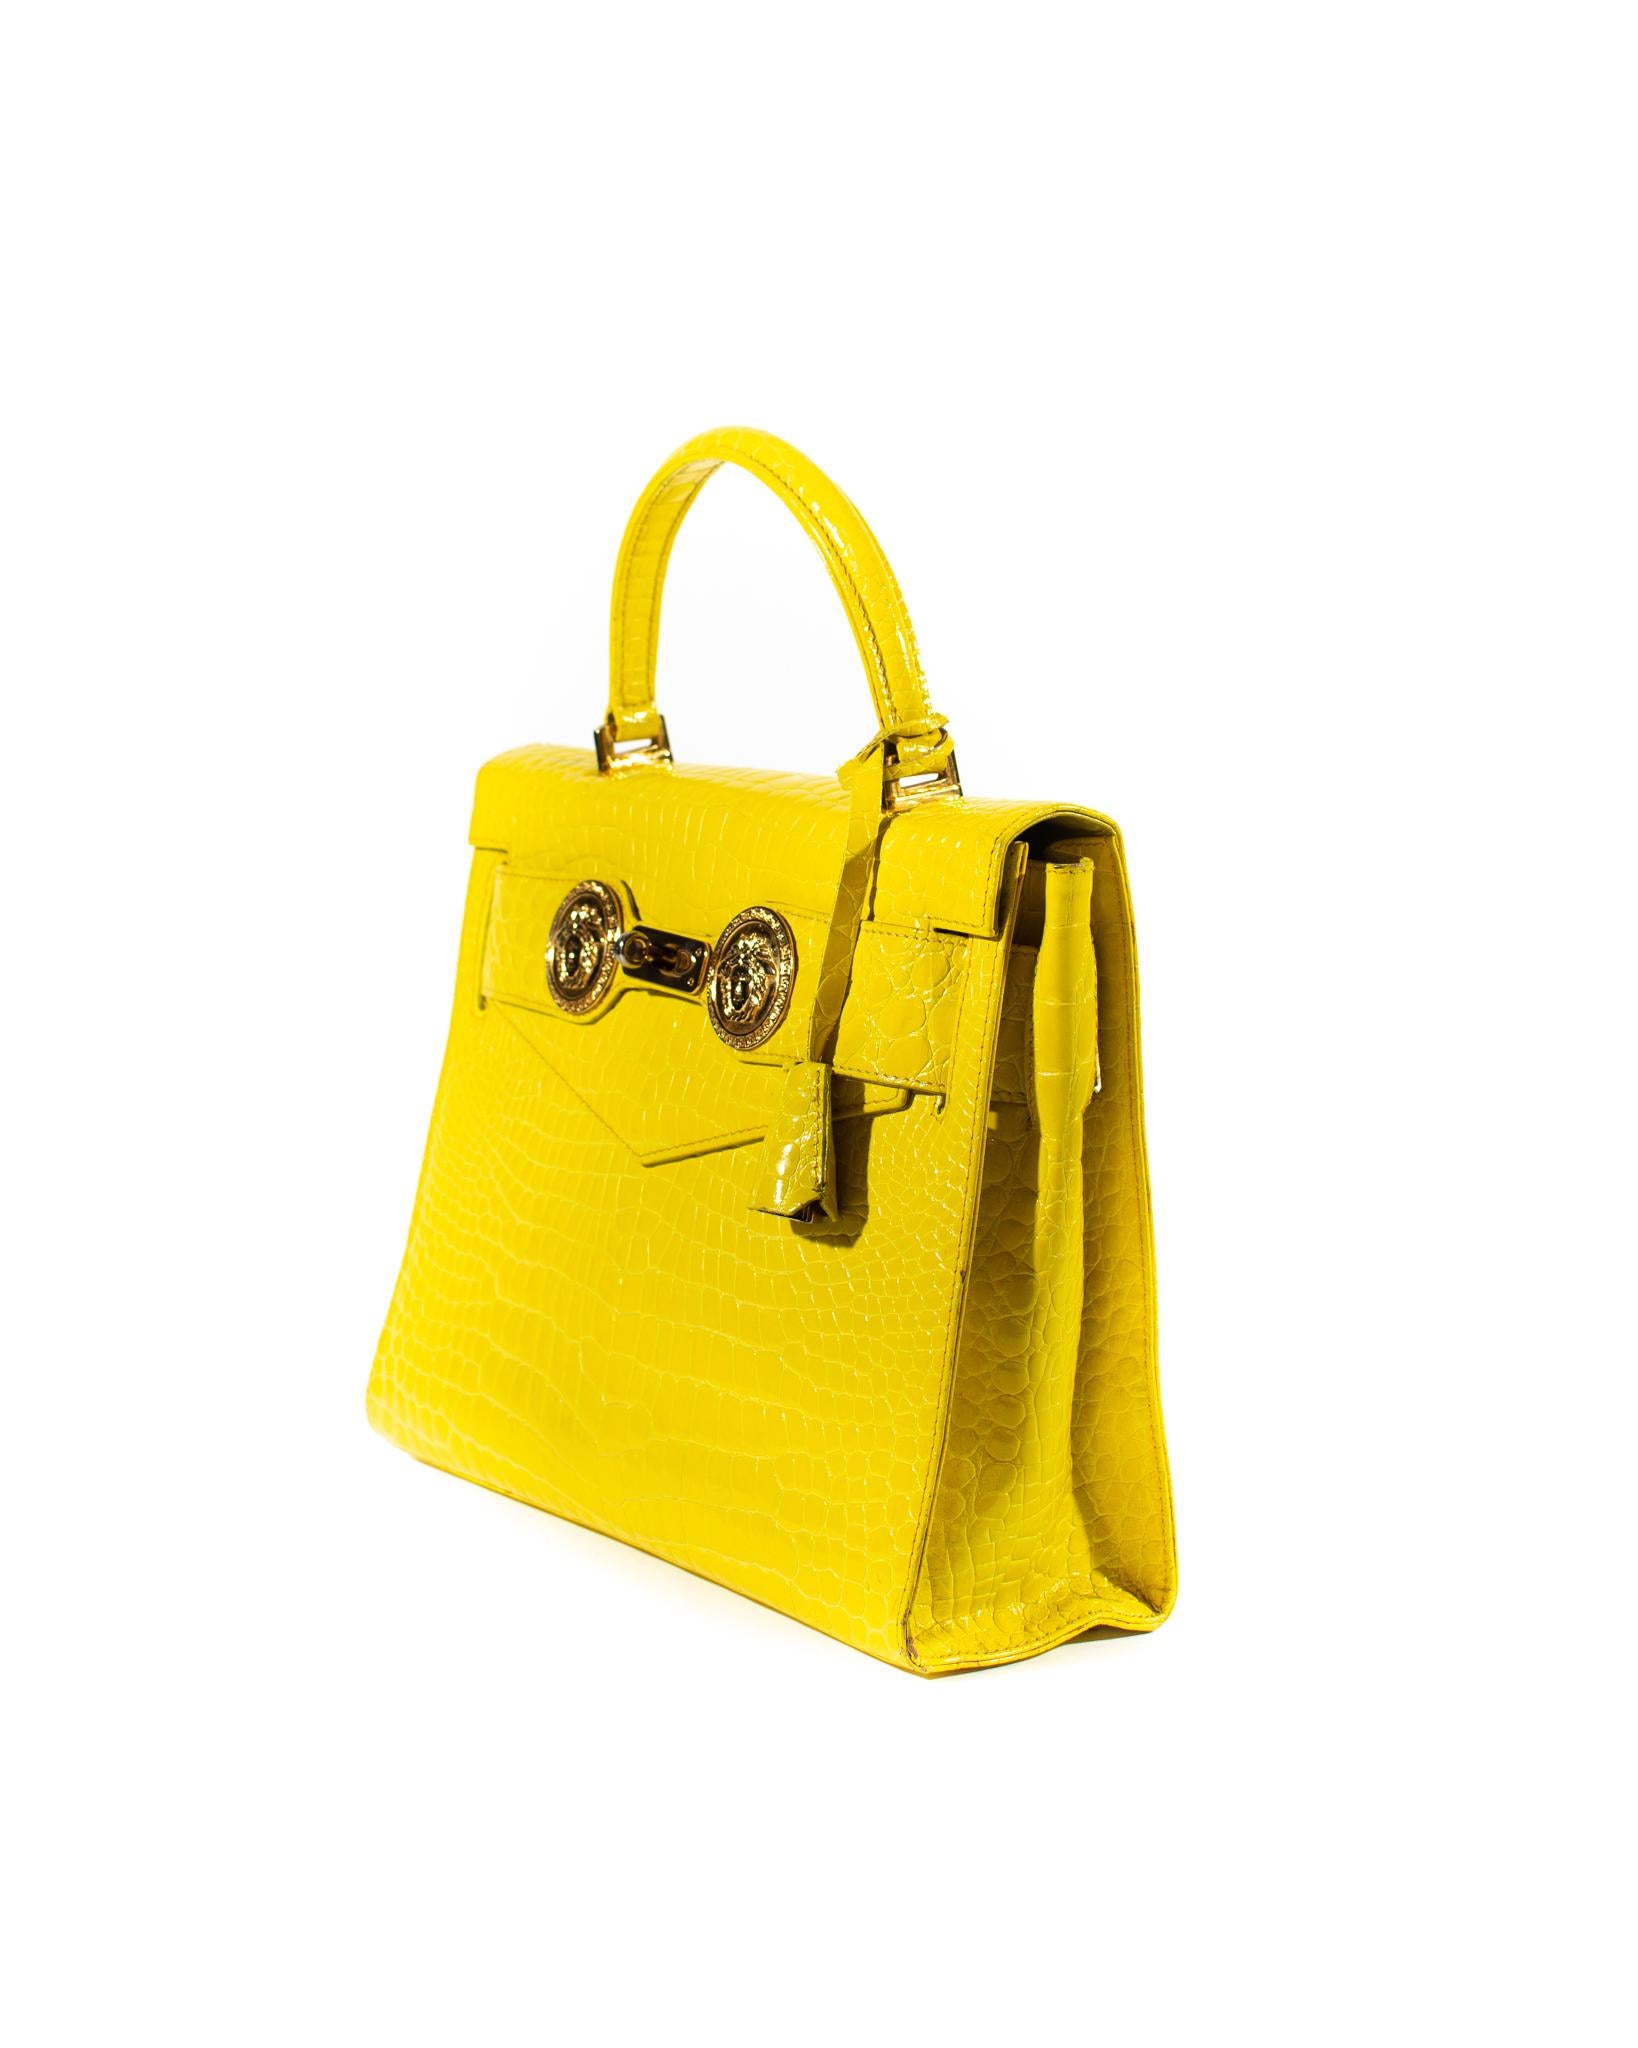 Women's F/W 1994 Gianni Versace Yellow Crocodile Embossed Patent Kelly Style 'Diana' Bag For Sale